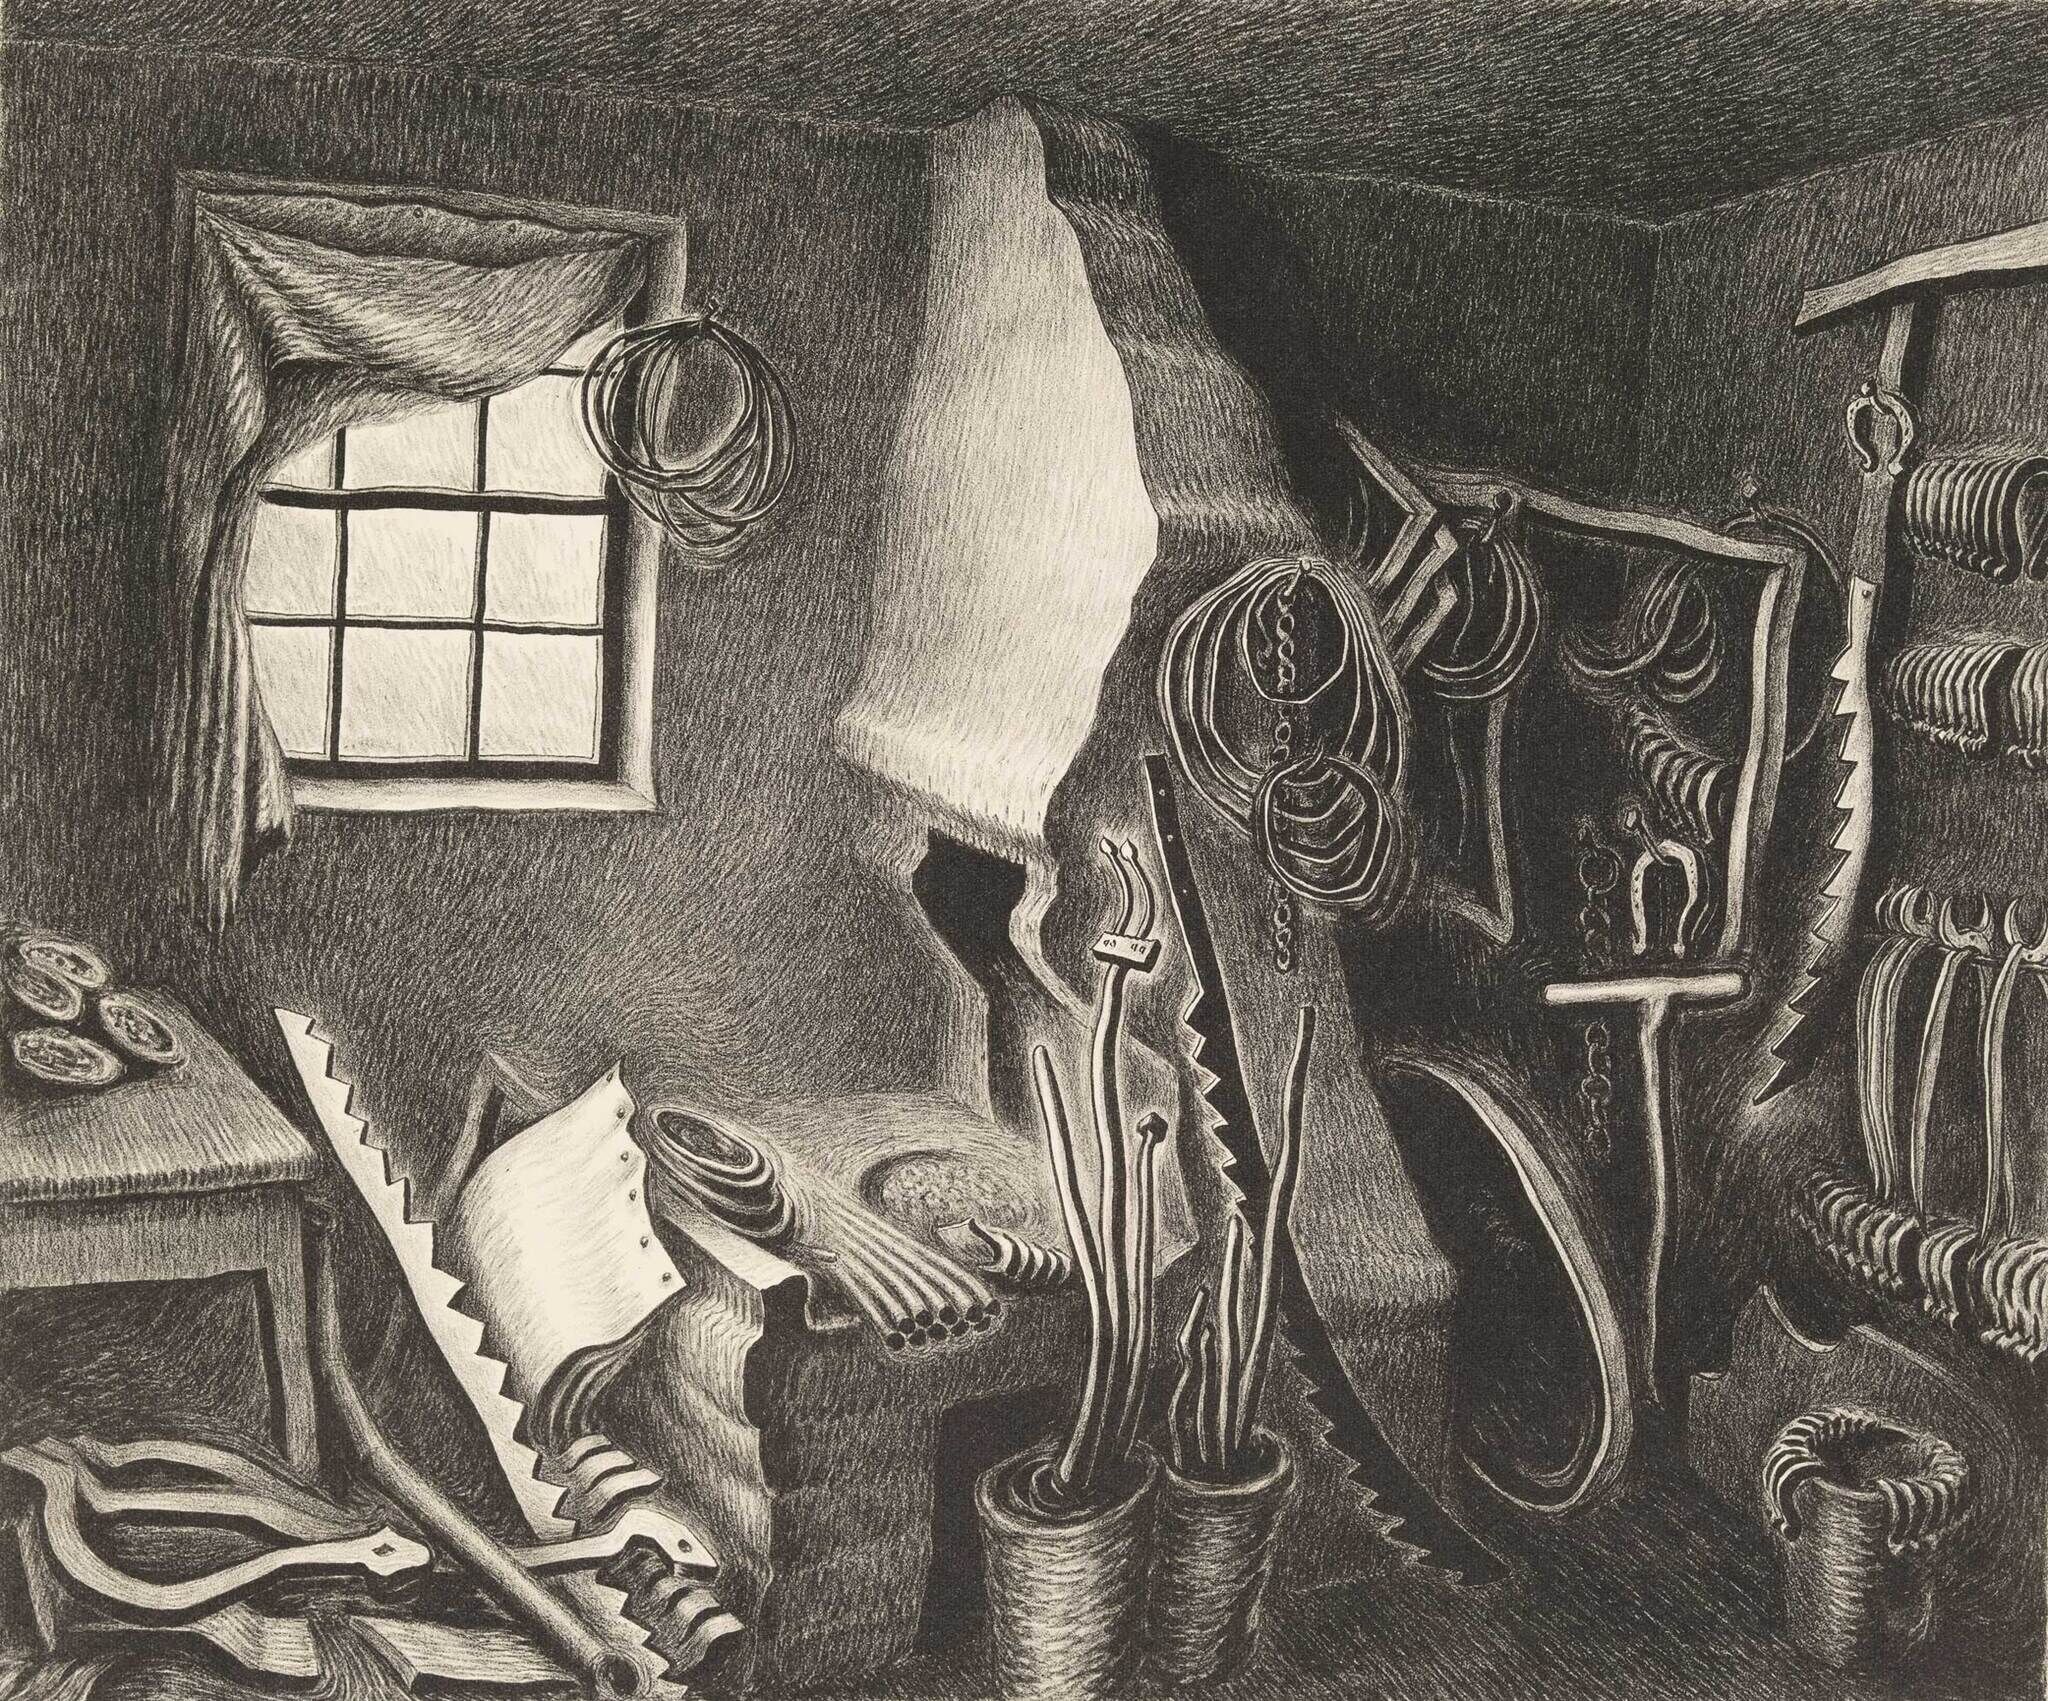 Monochrome etching of a cluttered workshop with tools, saws, and belts hanging on the walls, and a window with a tattered curtain.